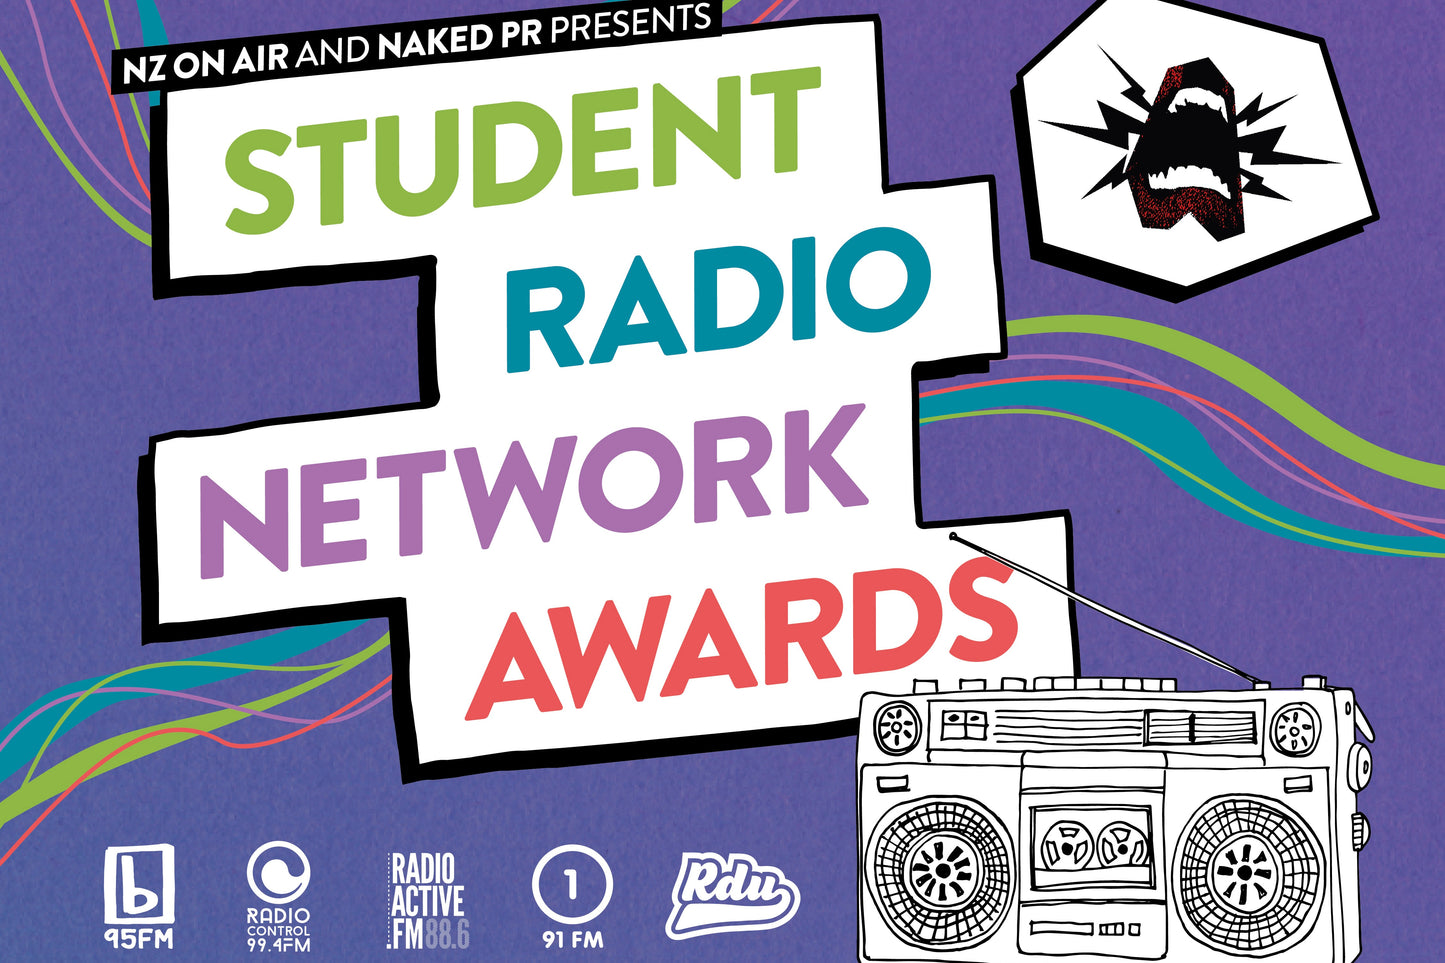 STUDENT RADIO NETWORK AWARDS 2022 EVENT ANNOUNCED